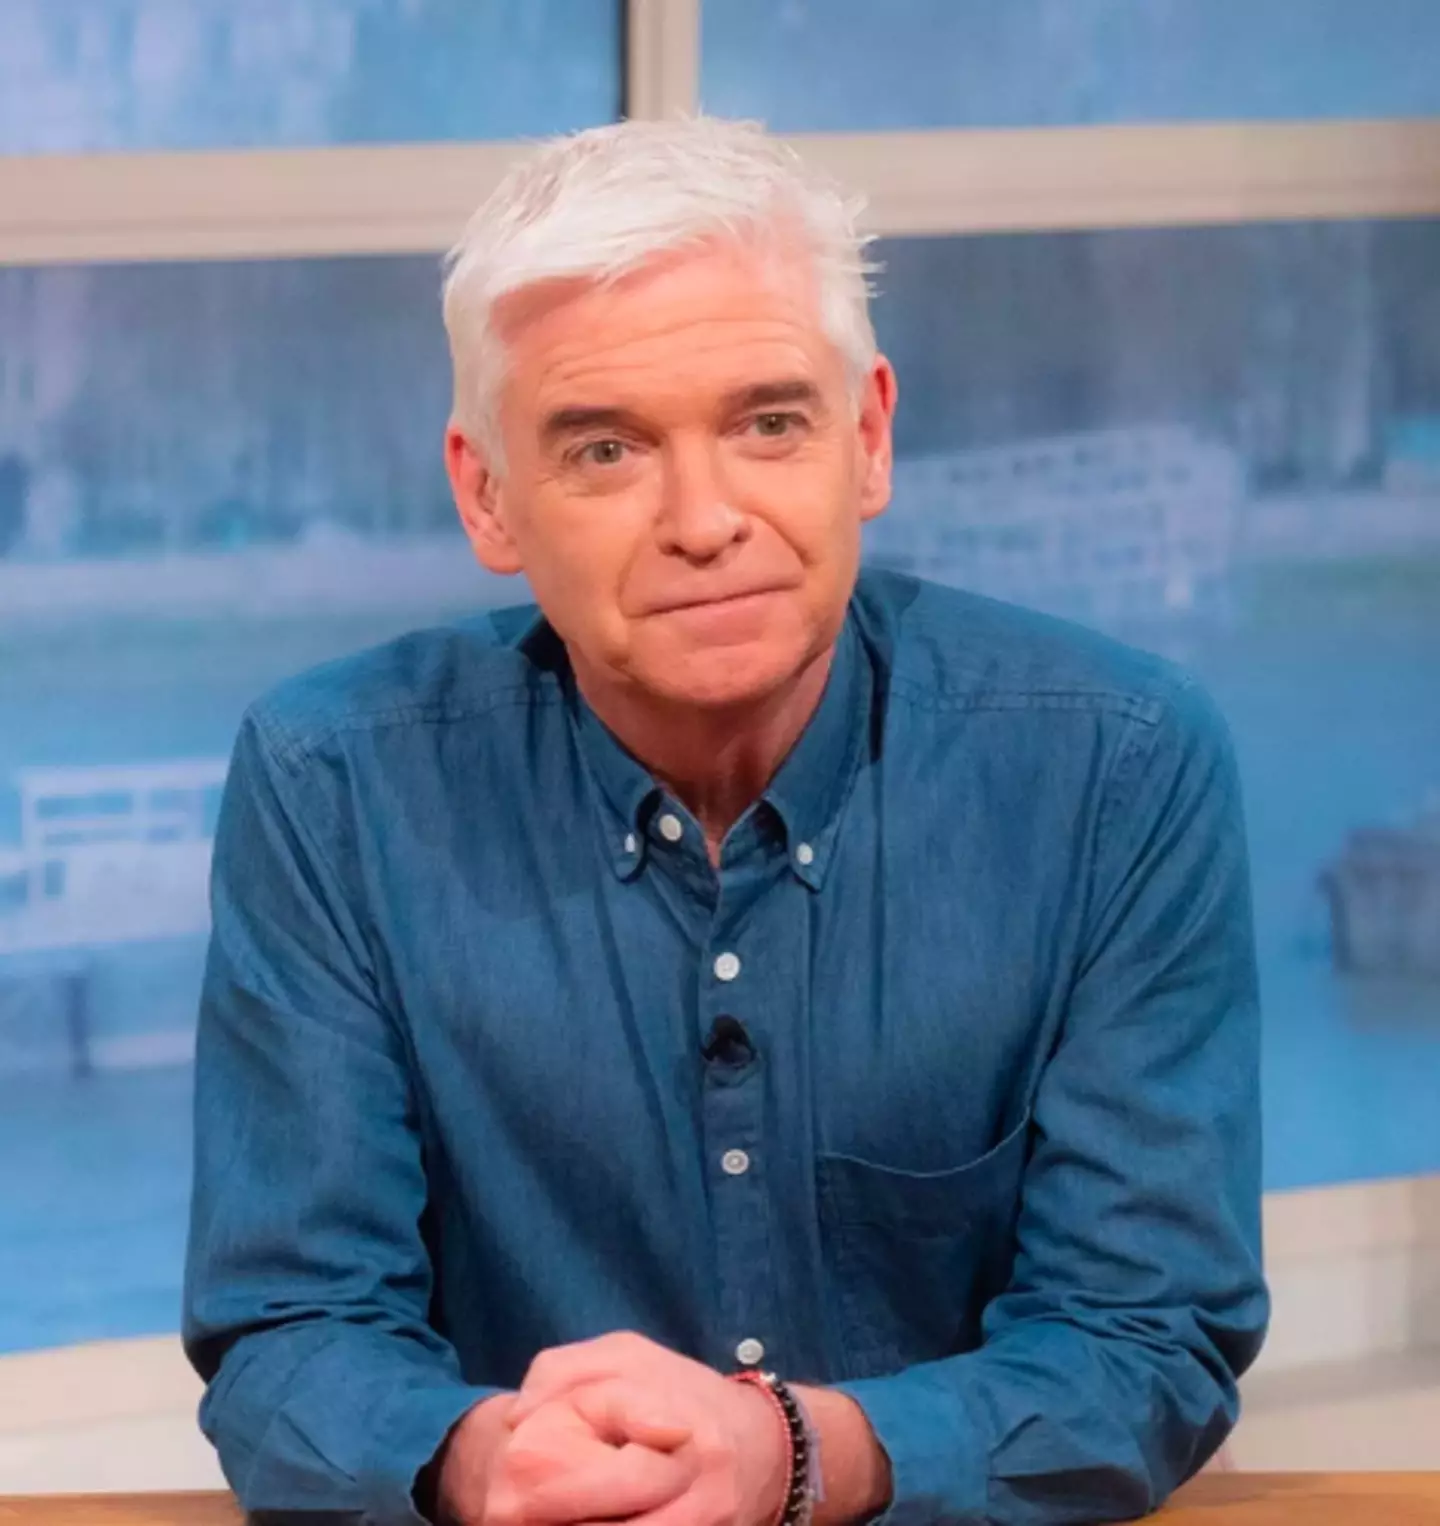 Phillip Schofield 'reluctantly declined' to take part in an external review after his departure from ITV.